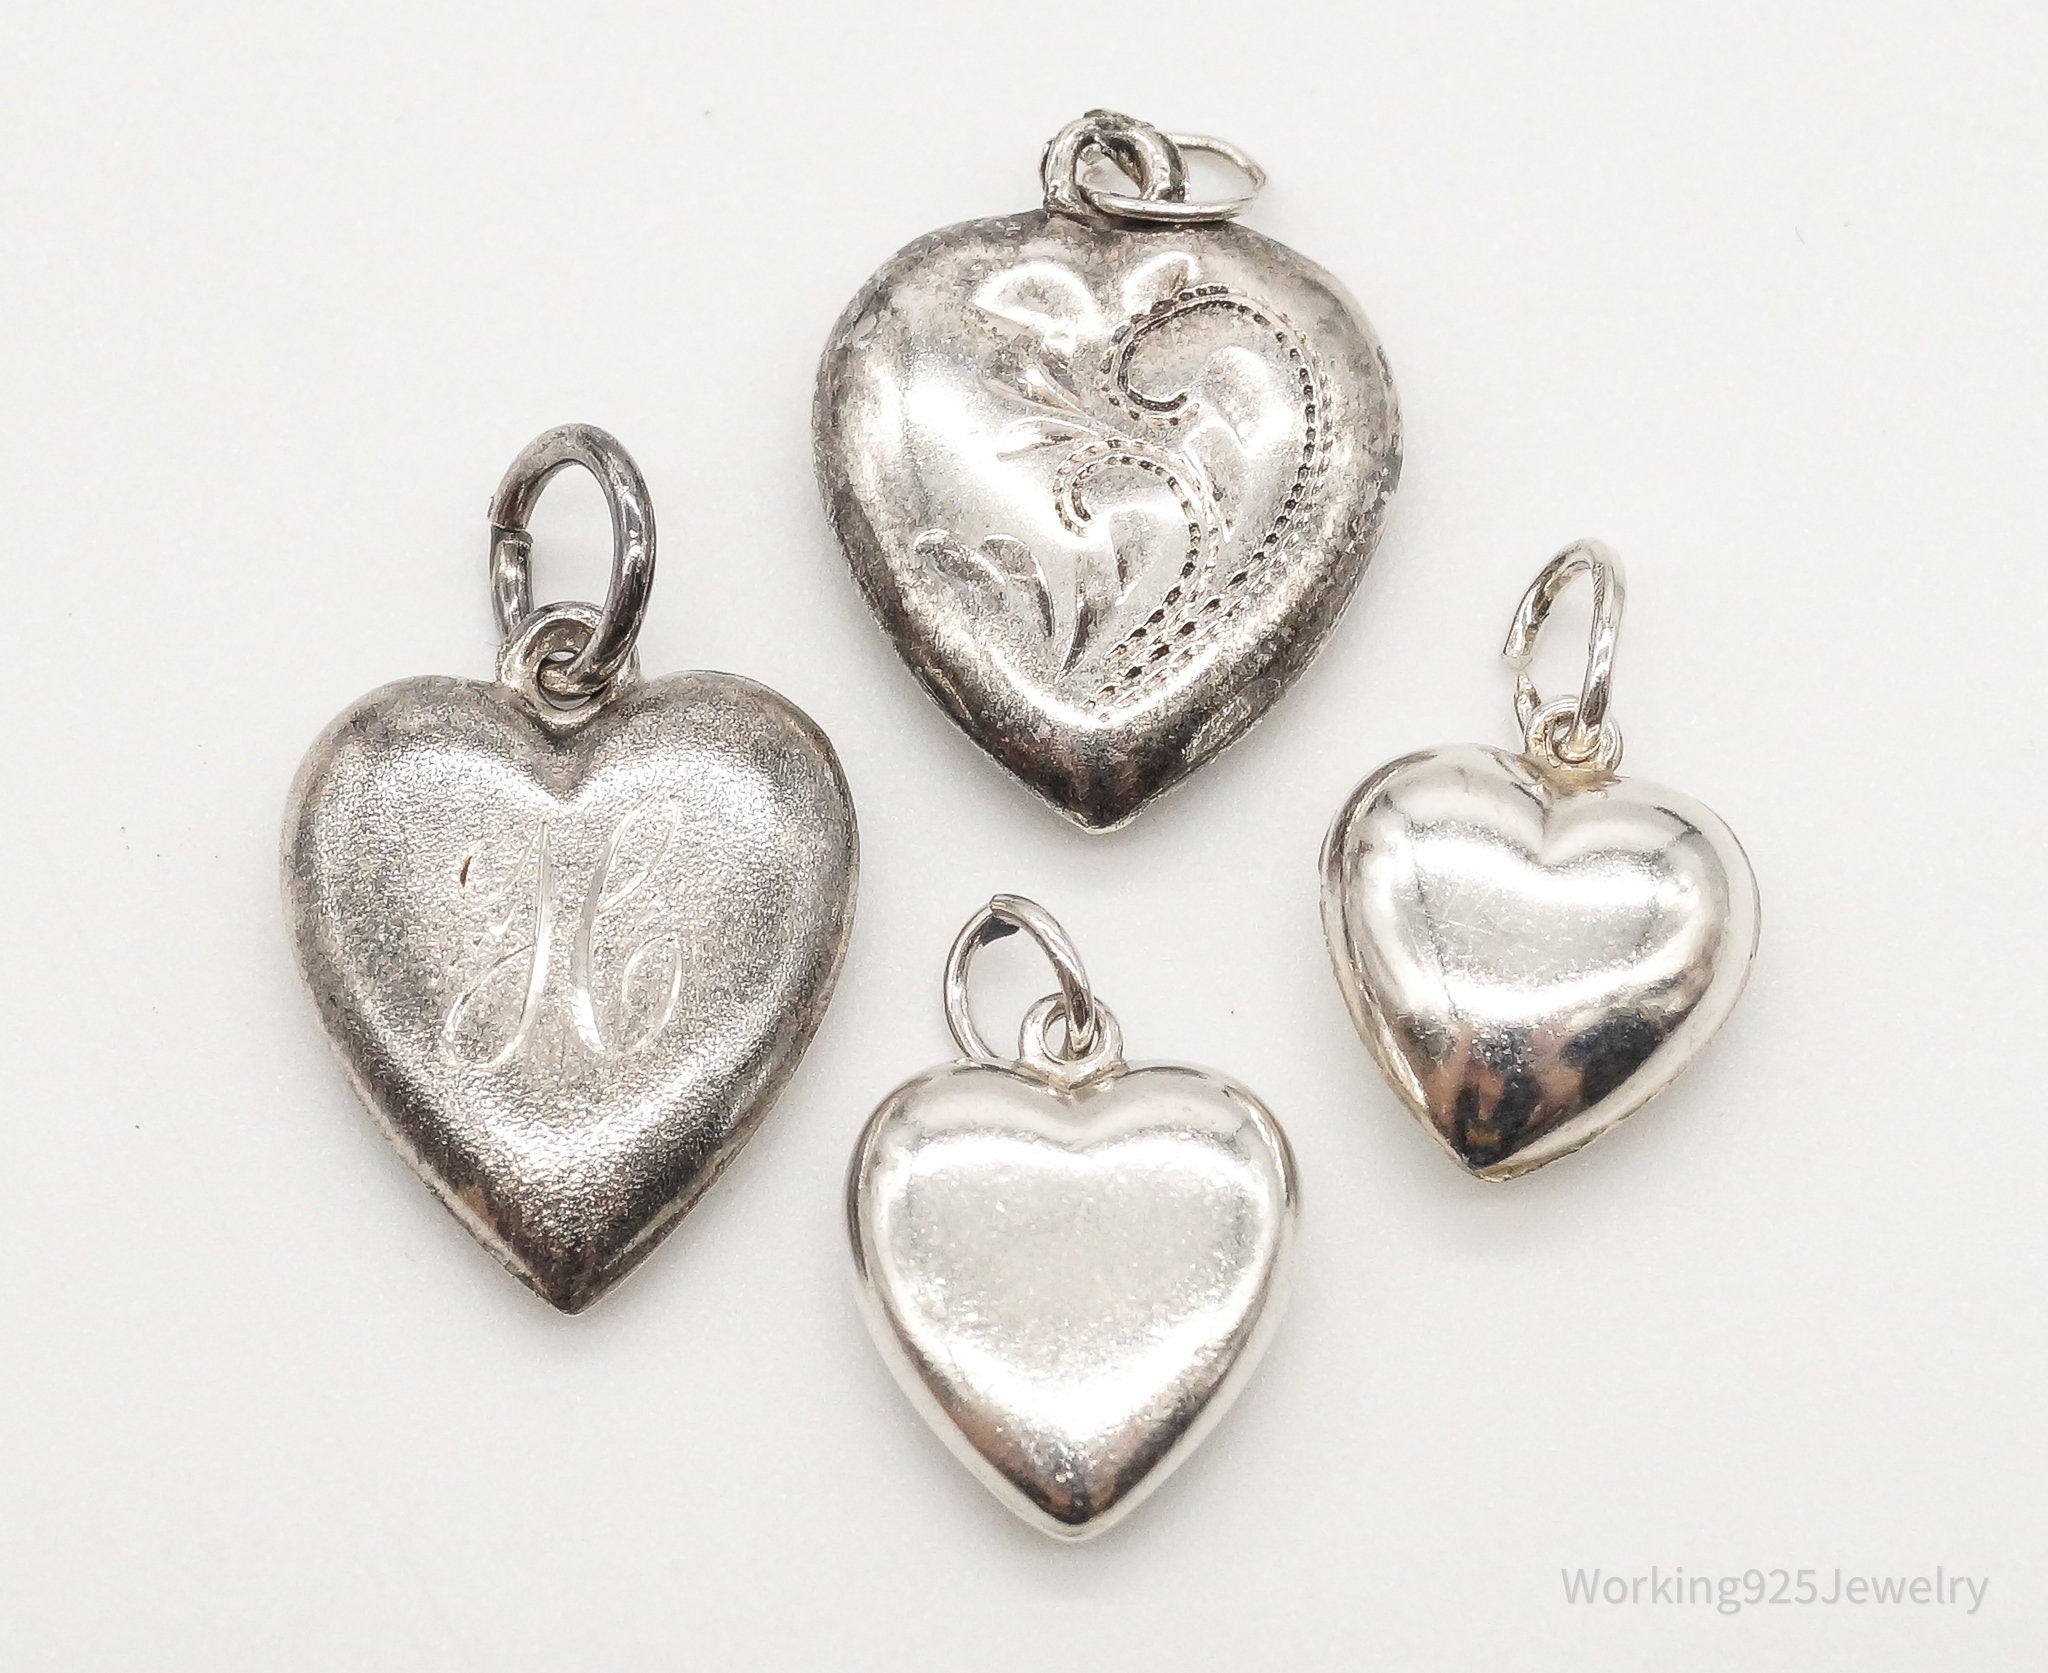 Antique Love Puffy Hearts Sterling Silver Charms Set Lot